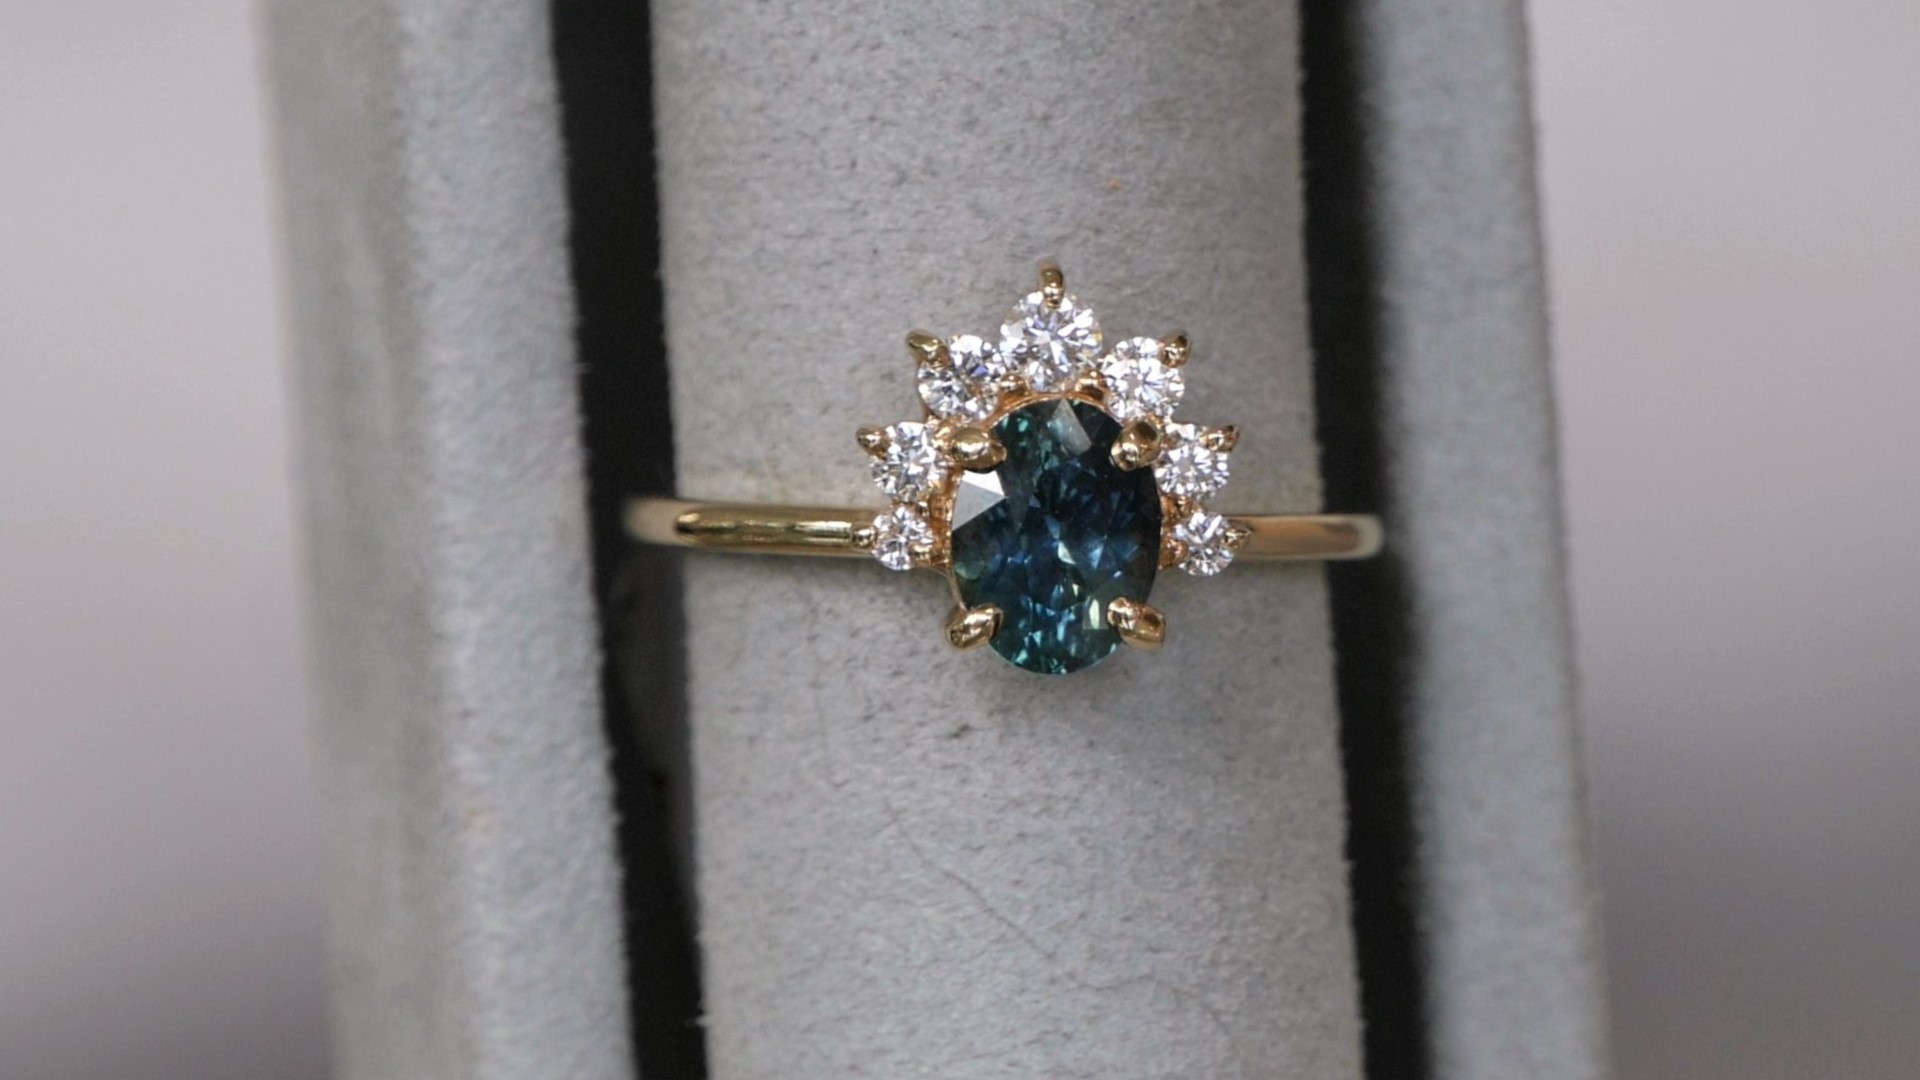 Valerie Madison Fine Jewelry in Madrona has engagement rings that are a twist on the classic - and stunningly beautiful.